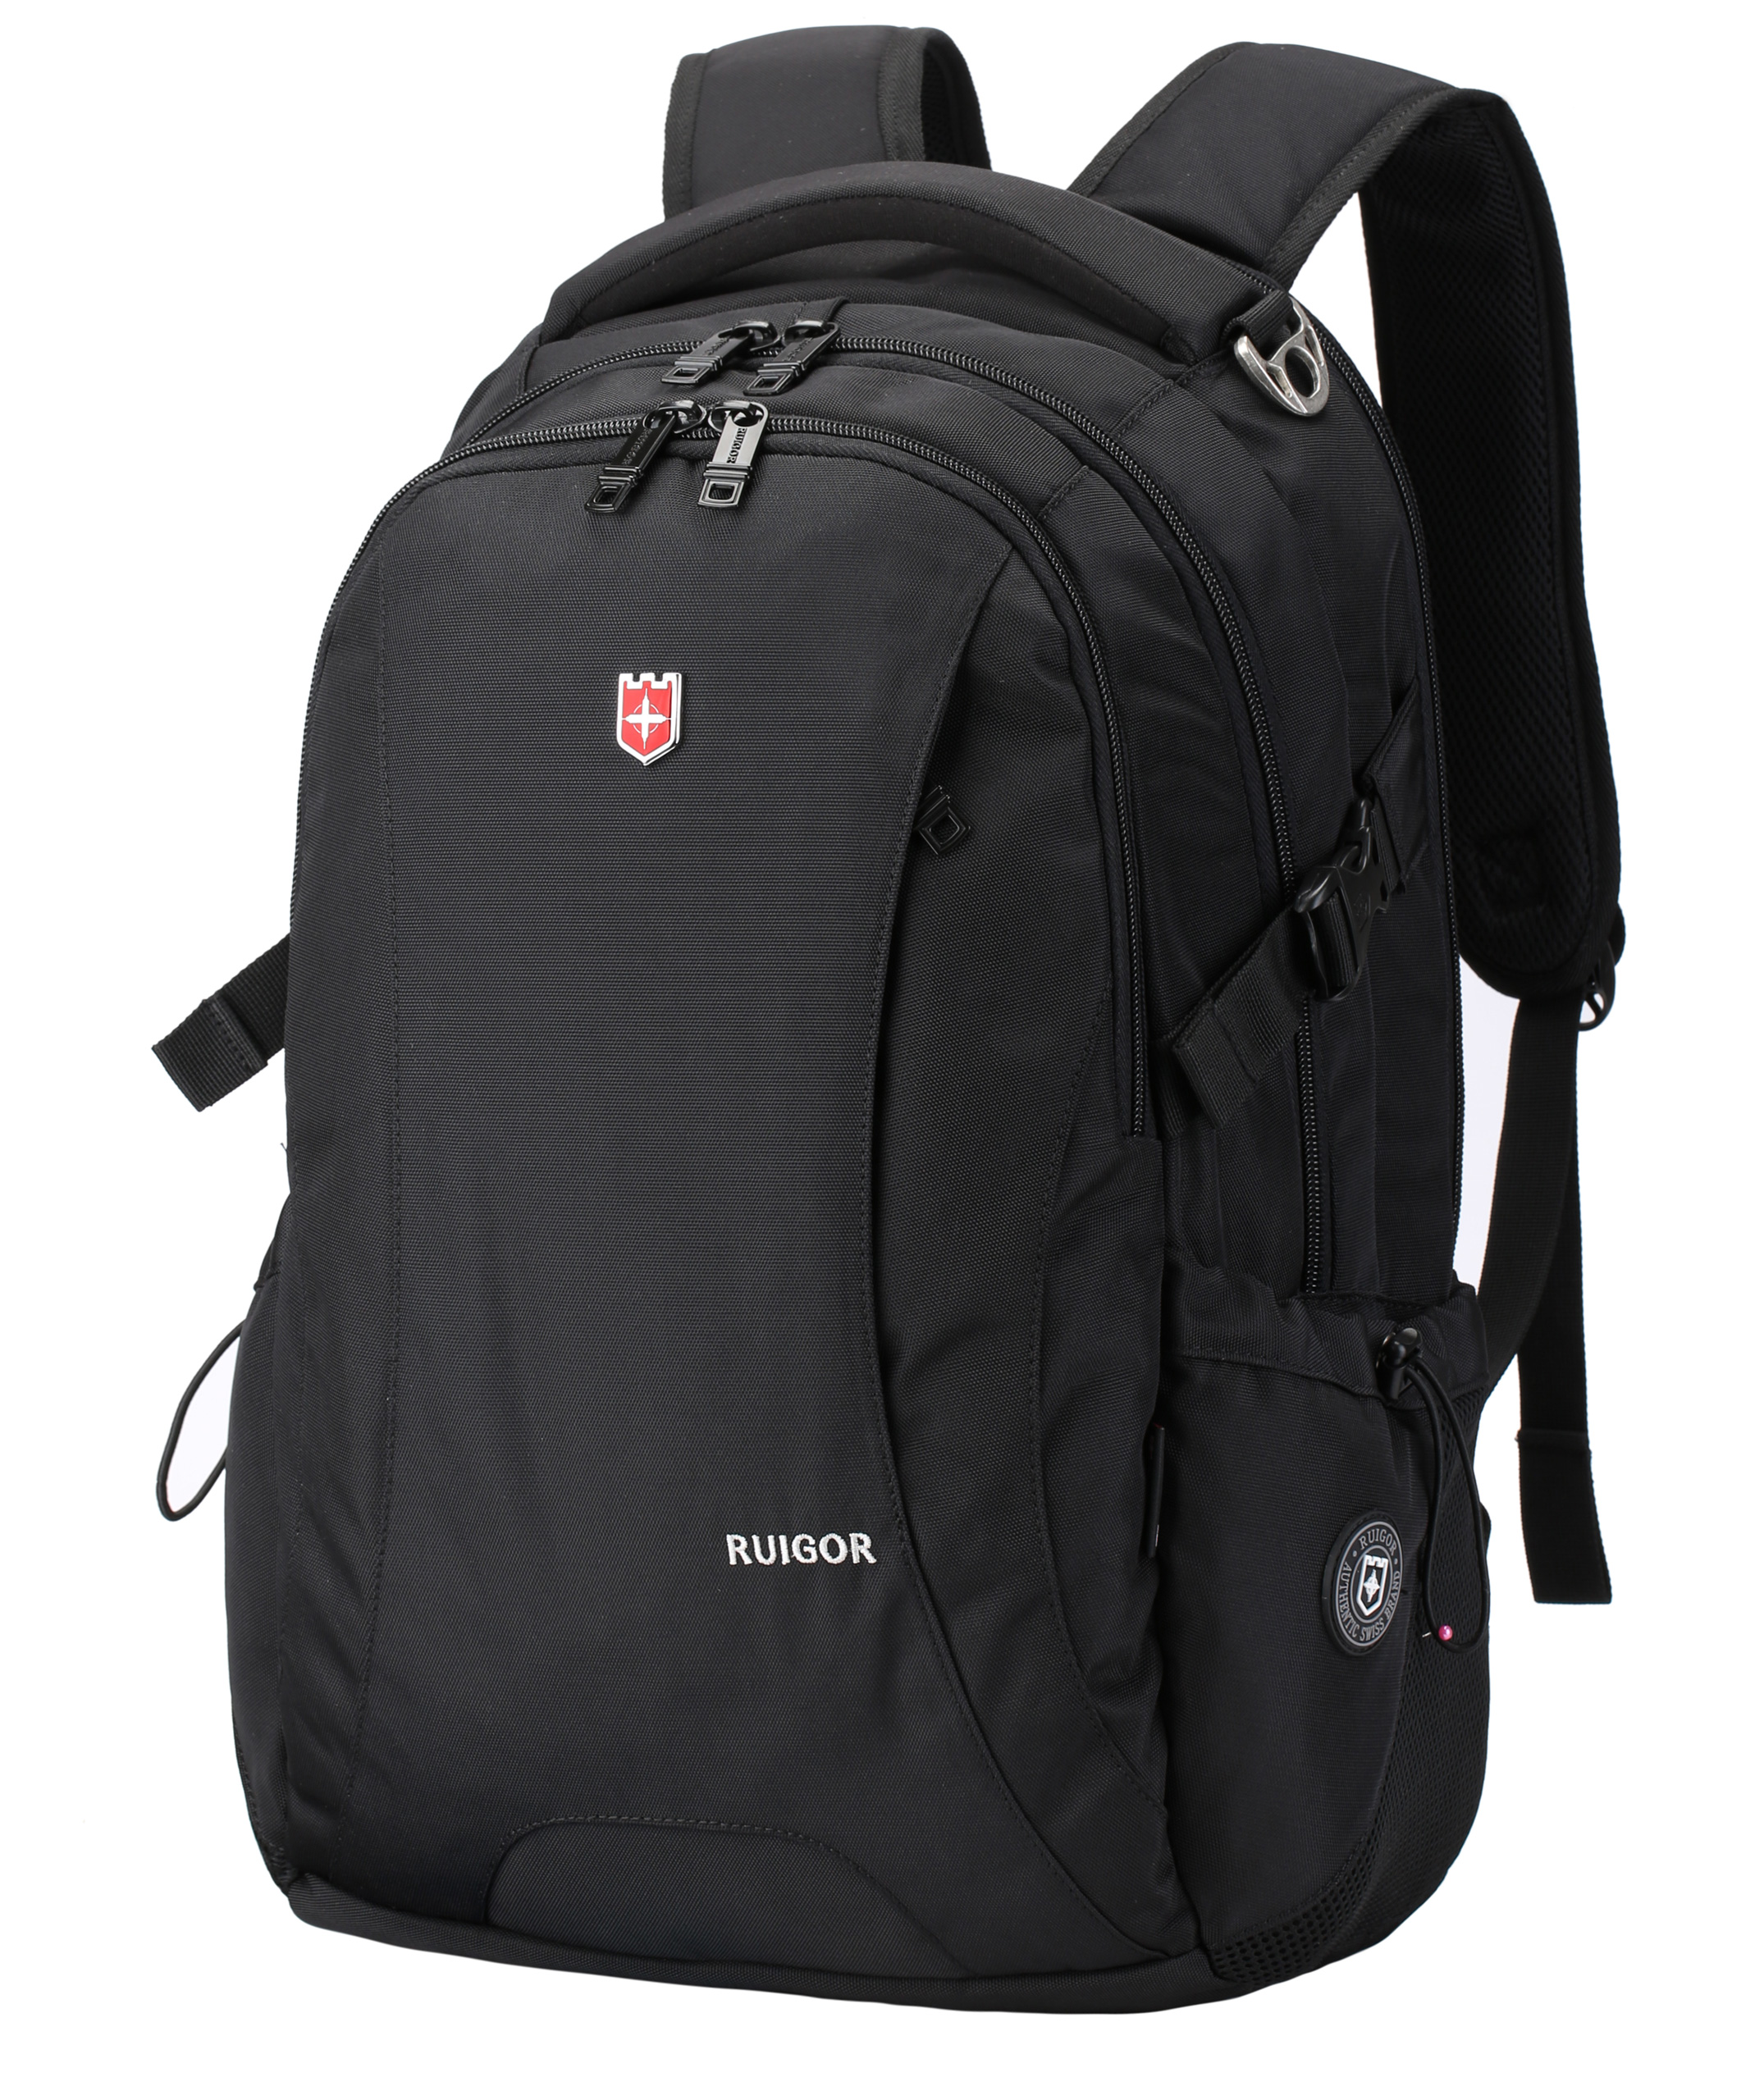 RUIGOR ICON 78 BACKPACK BLACK LARGE